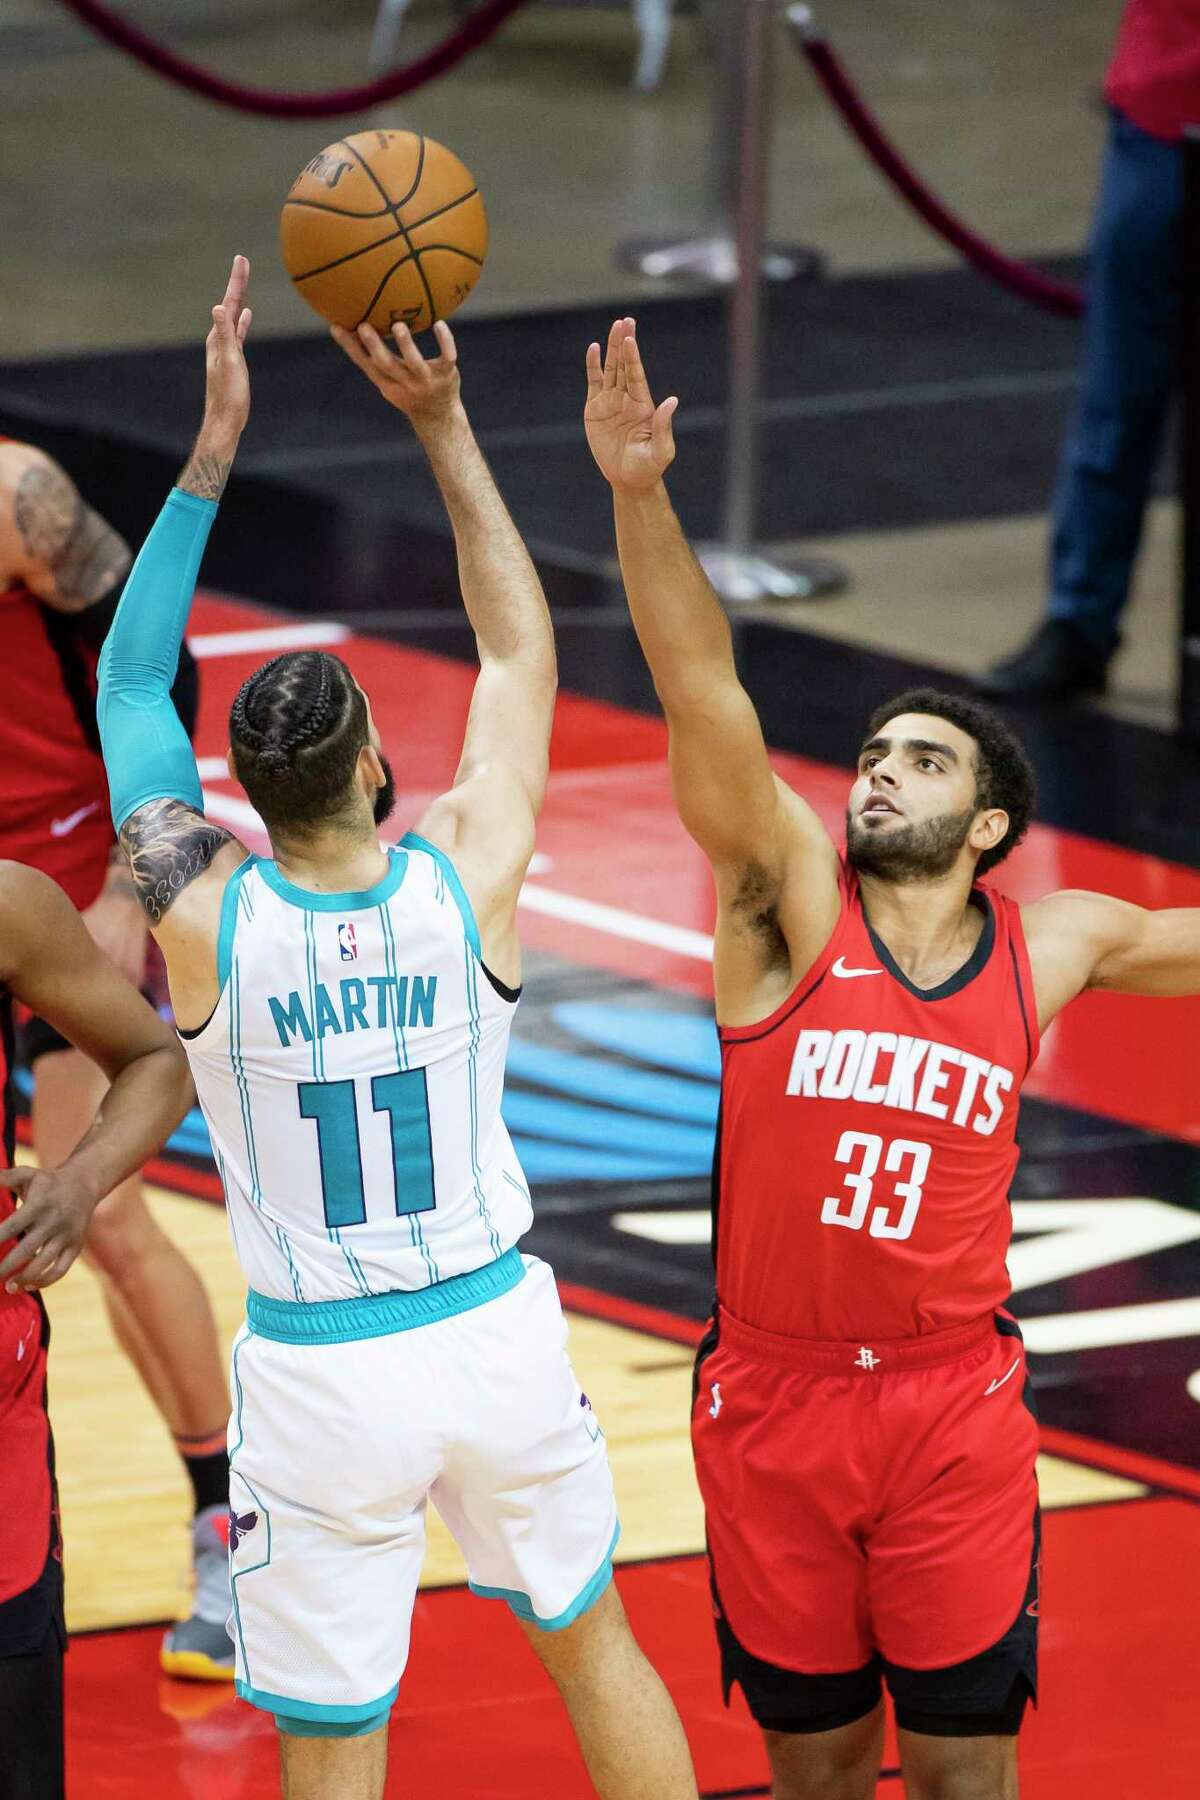 Houston Rockets forward Anthony Lamb (33) defends a shot by Charlotte Hornets forward Cody Martin (11) during the fourth quarter of an NBA game between the Houston Rockets and Charlotte Hornets on Wednesday, March 24, 2021, at Toyota Center in Houston.